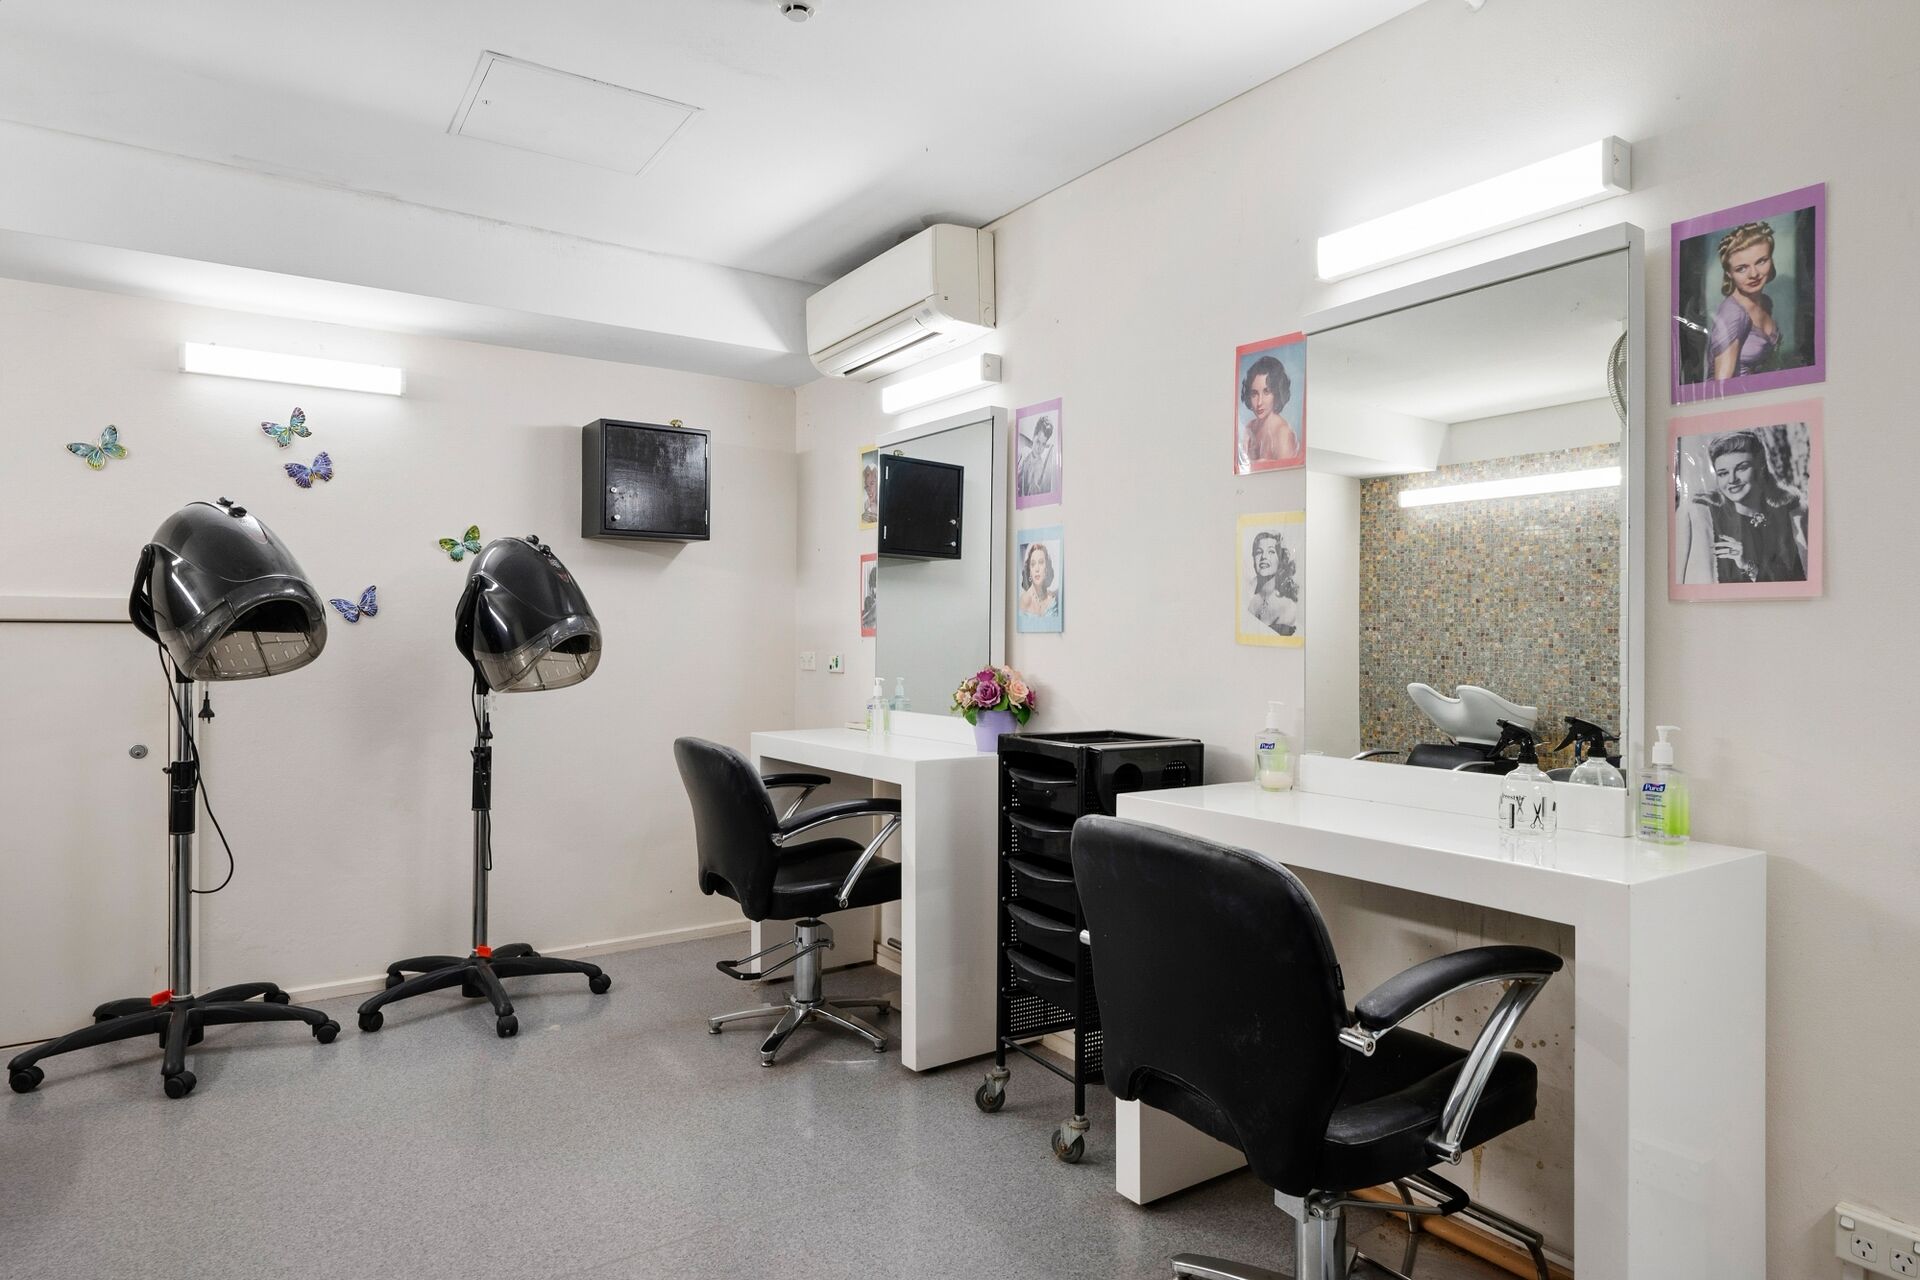 Salon at baptistcare cooinda court residential aged care home in macquarie park northern sydney